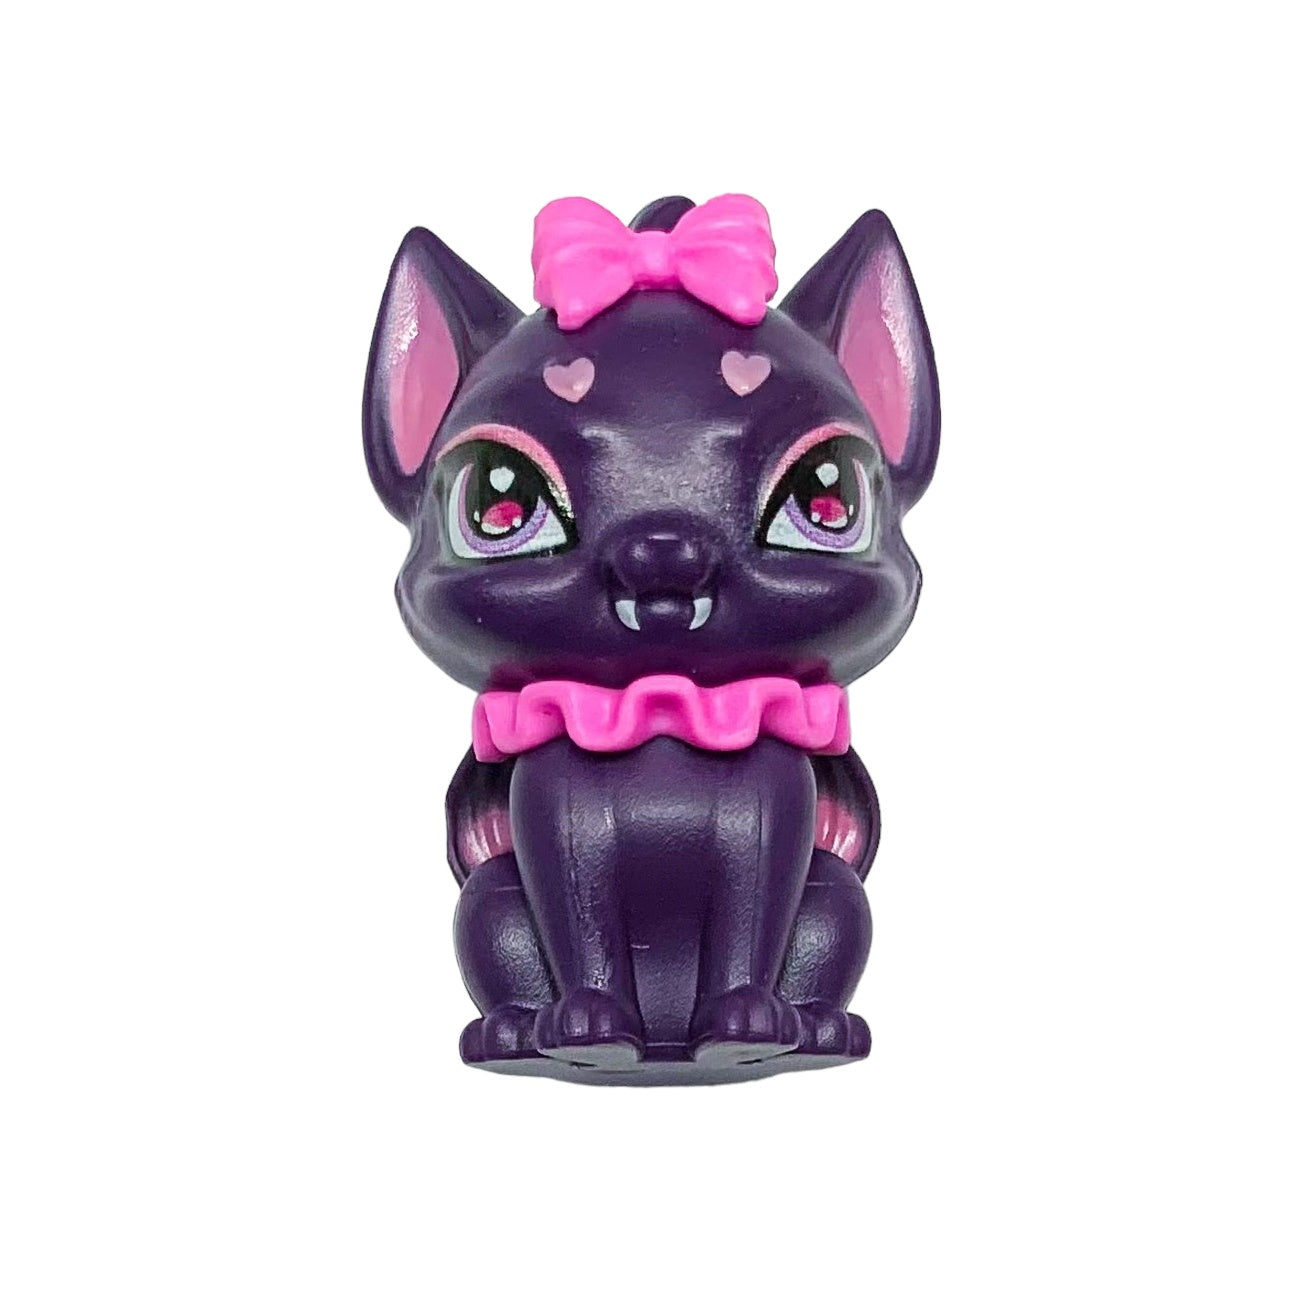 Draculaura wave 1 with pet Count Fabulous